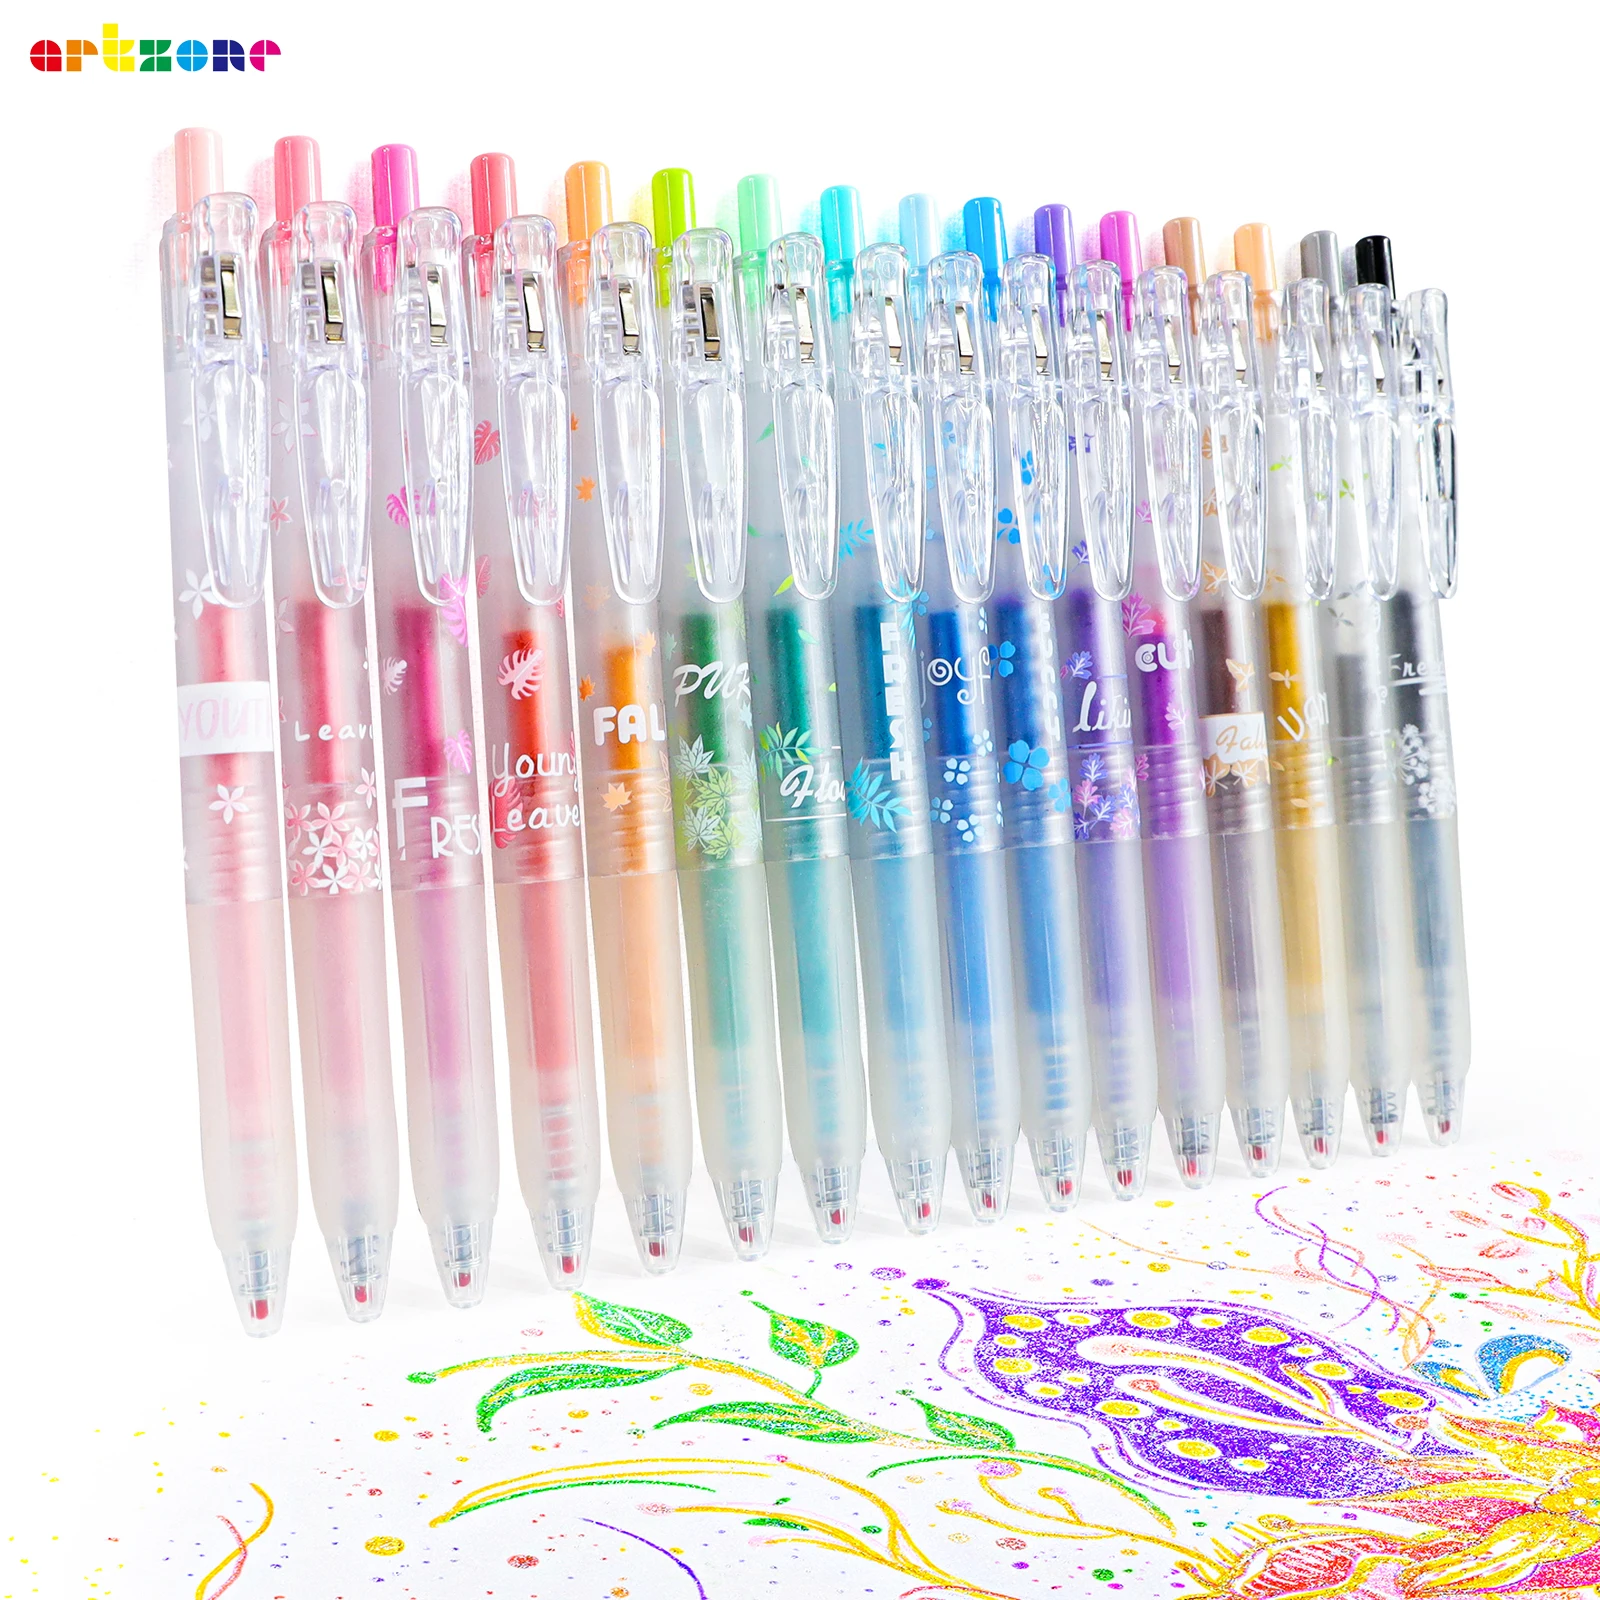 

Glitter Gel Pens 16 Assorted Pastel Color 0.7mm Retractable Colored Sparkle Glitter Pen Set for Adults Kids Journaling Coloring